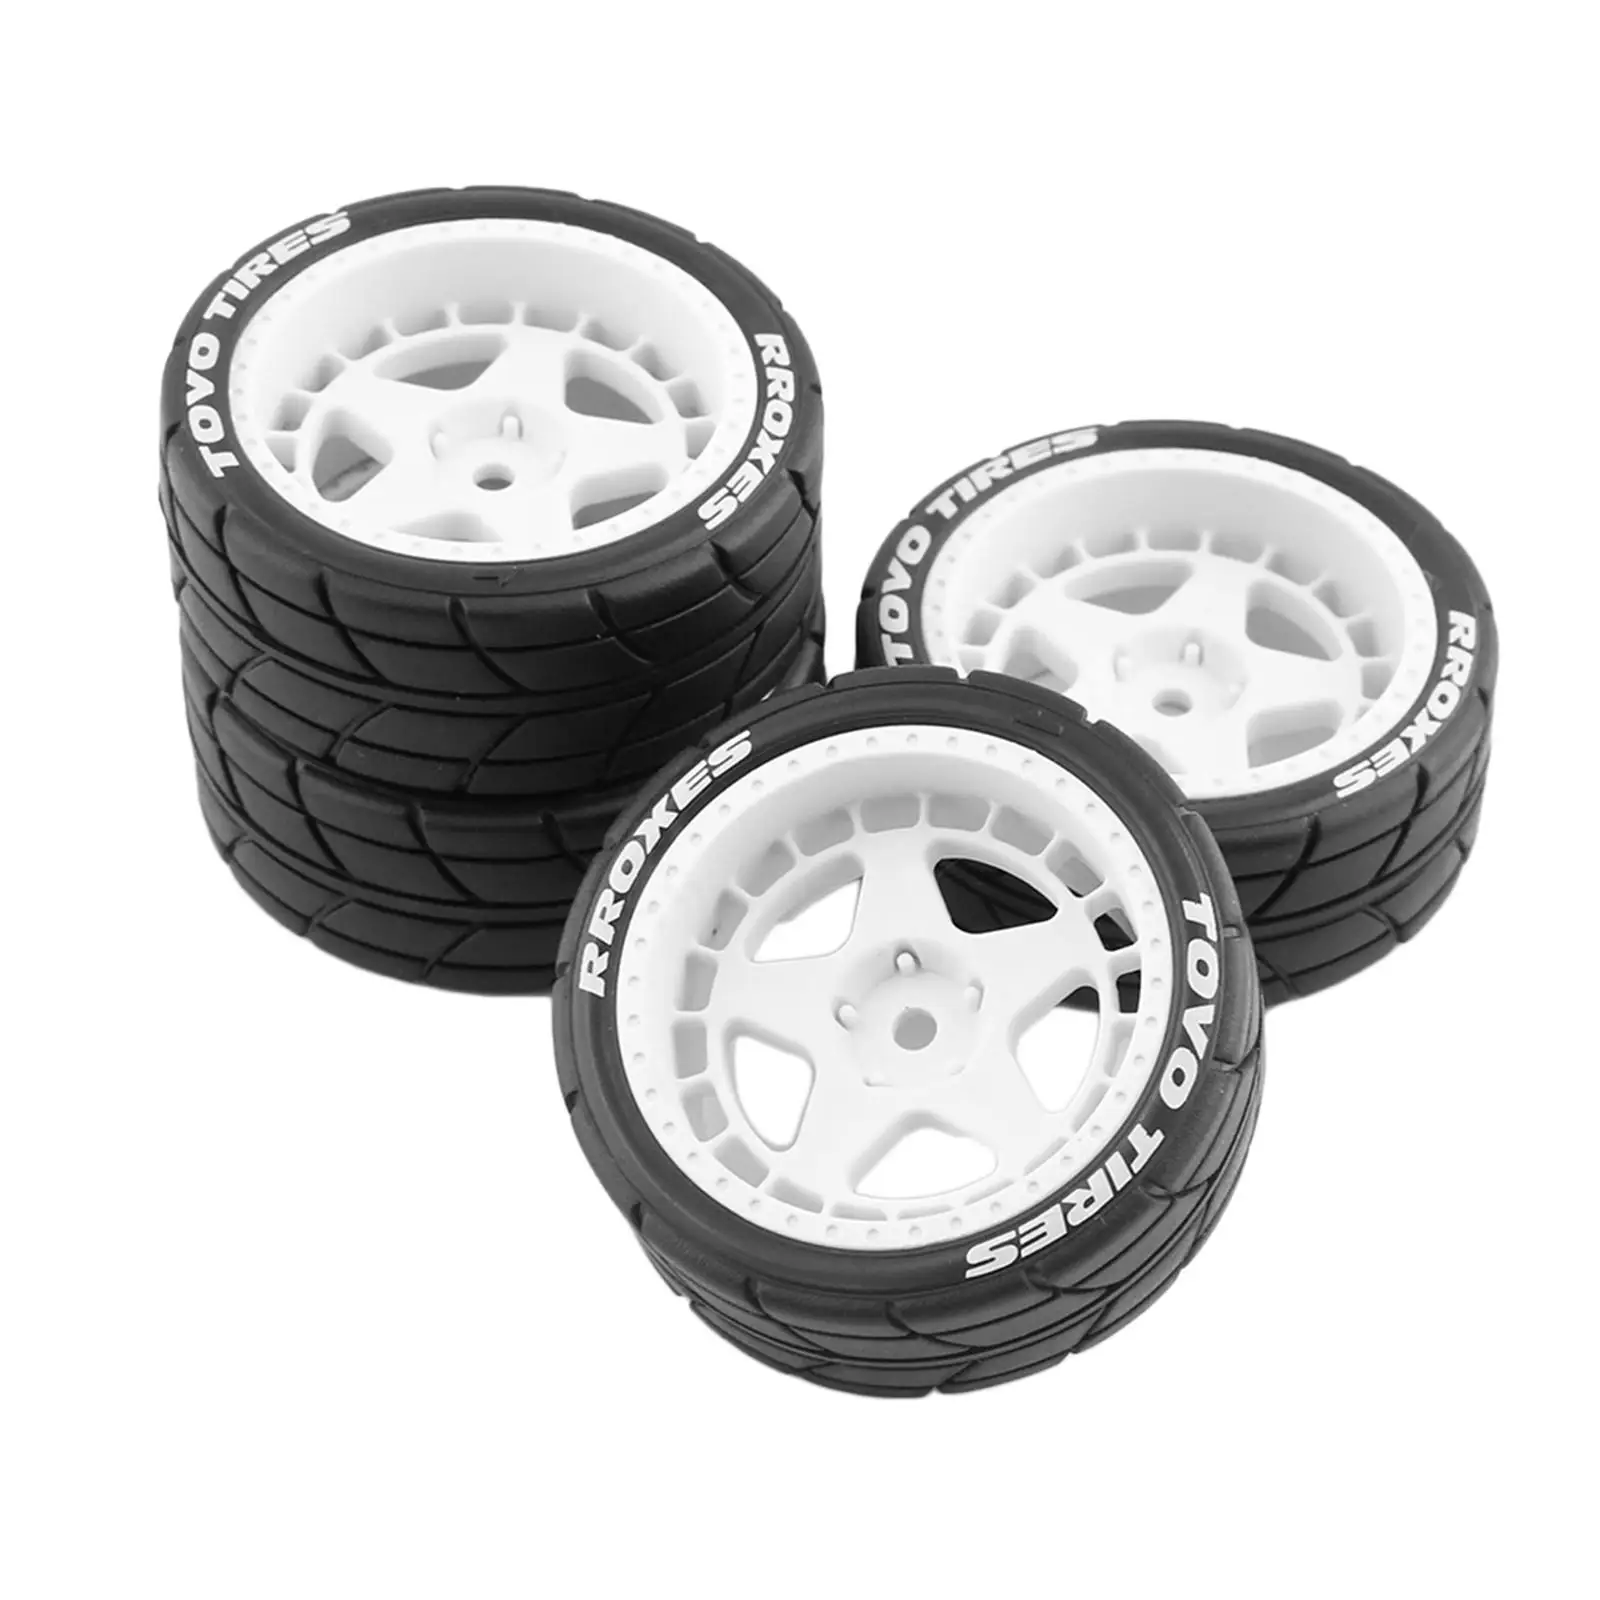 4x RC Rally  Tyres 12mm Hub  Replacement for TT02 XV01 1:10  Road Touring Car Parts